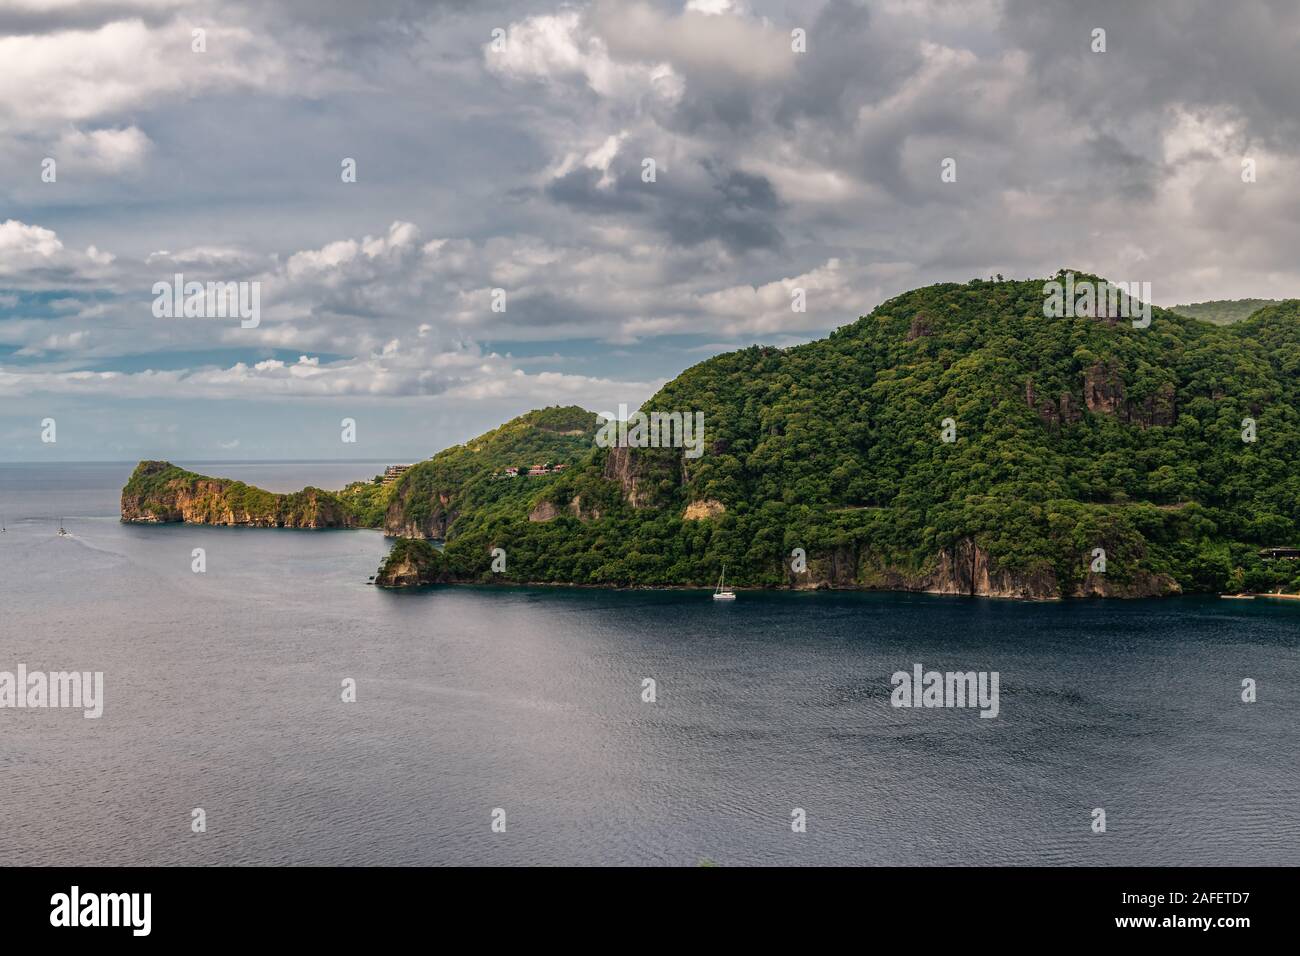 Small town Soufriere in Saint Lucia, Caribbean Islands Stock Photo